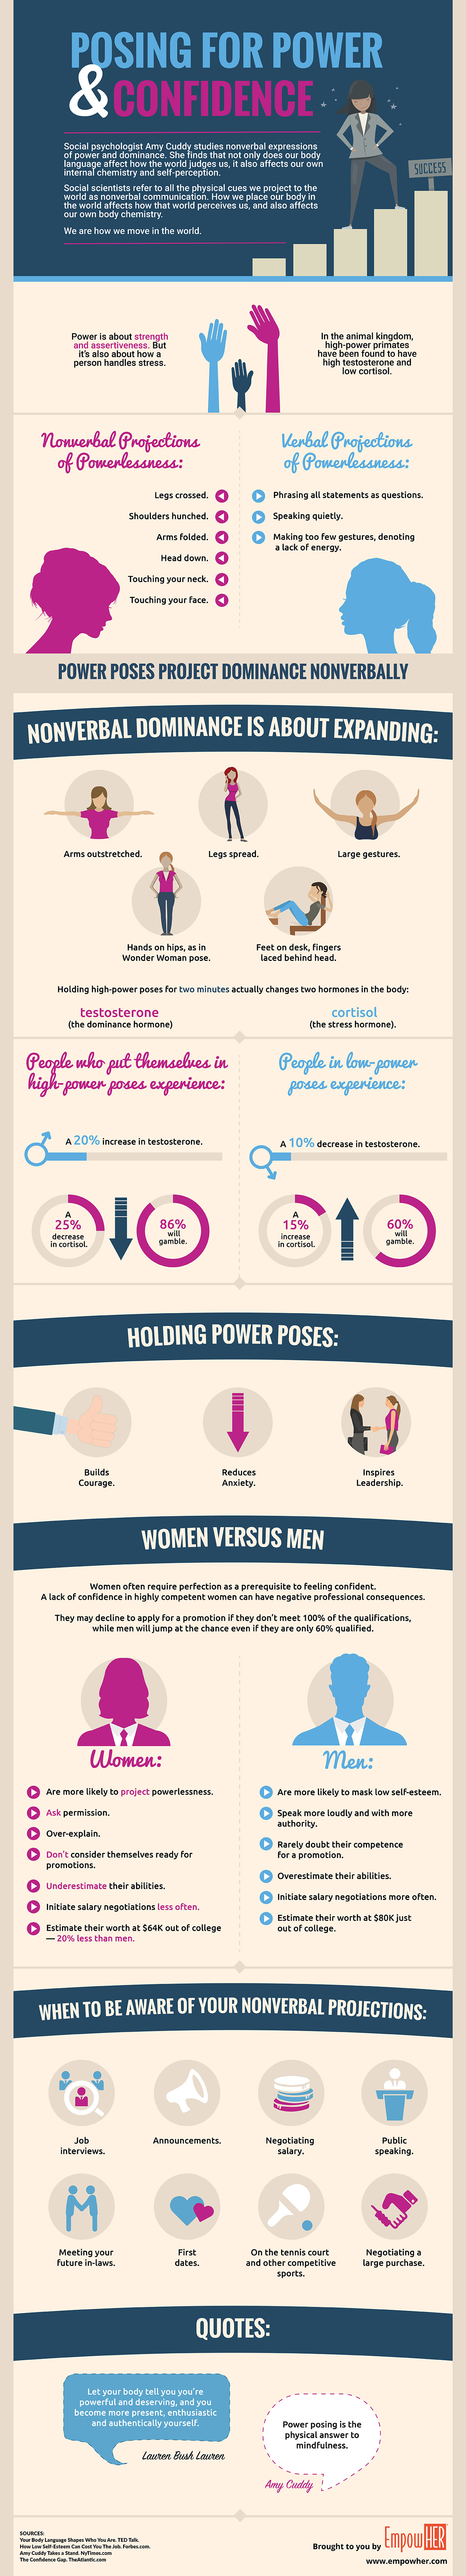 Infographic: Power Poses: A Two Minute Life Hack for Empowerment